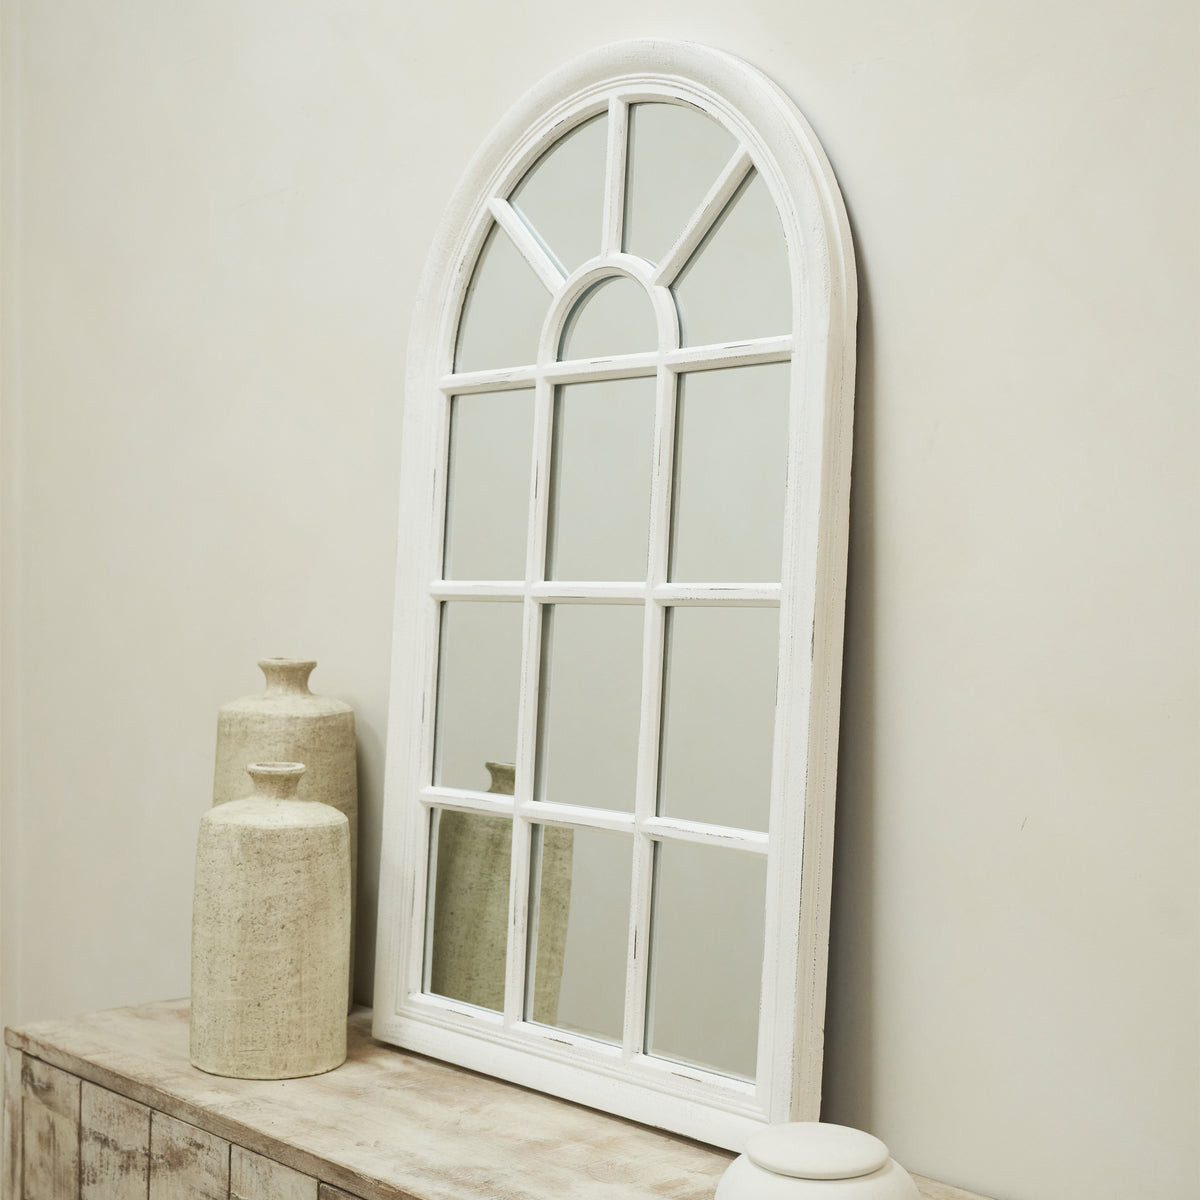 White Arched Shabby Chic Window Mirror on console table